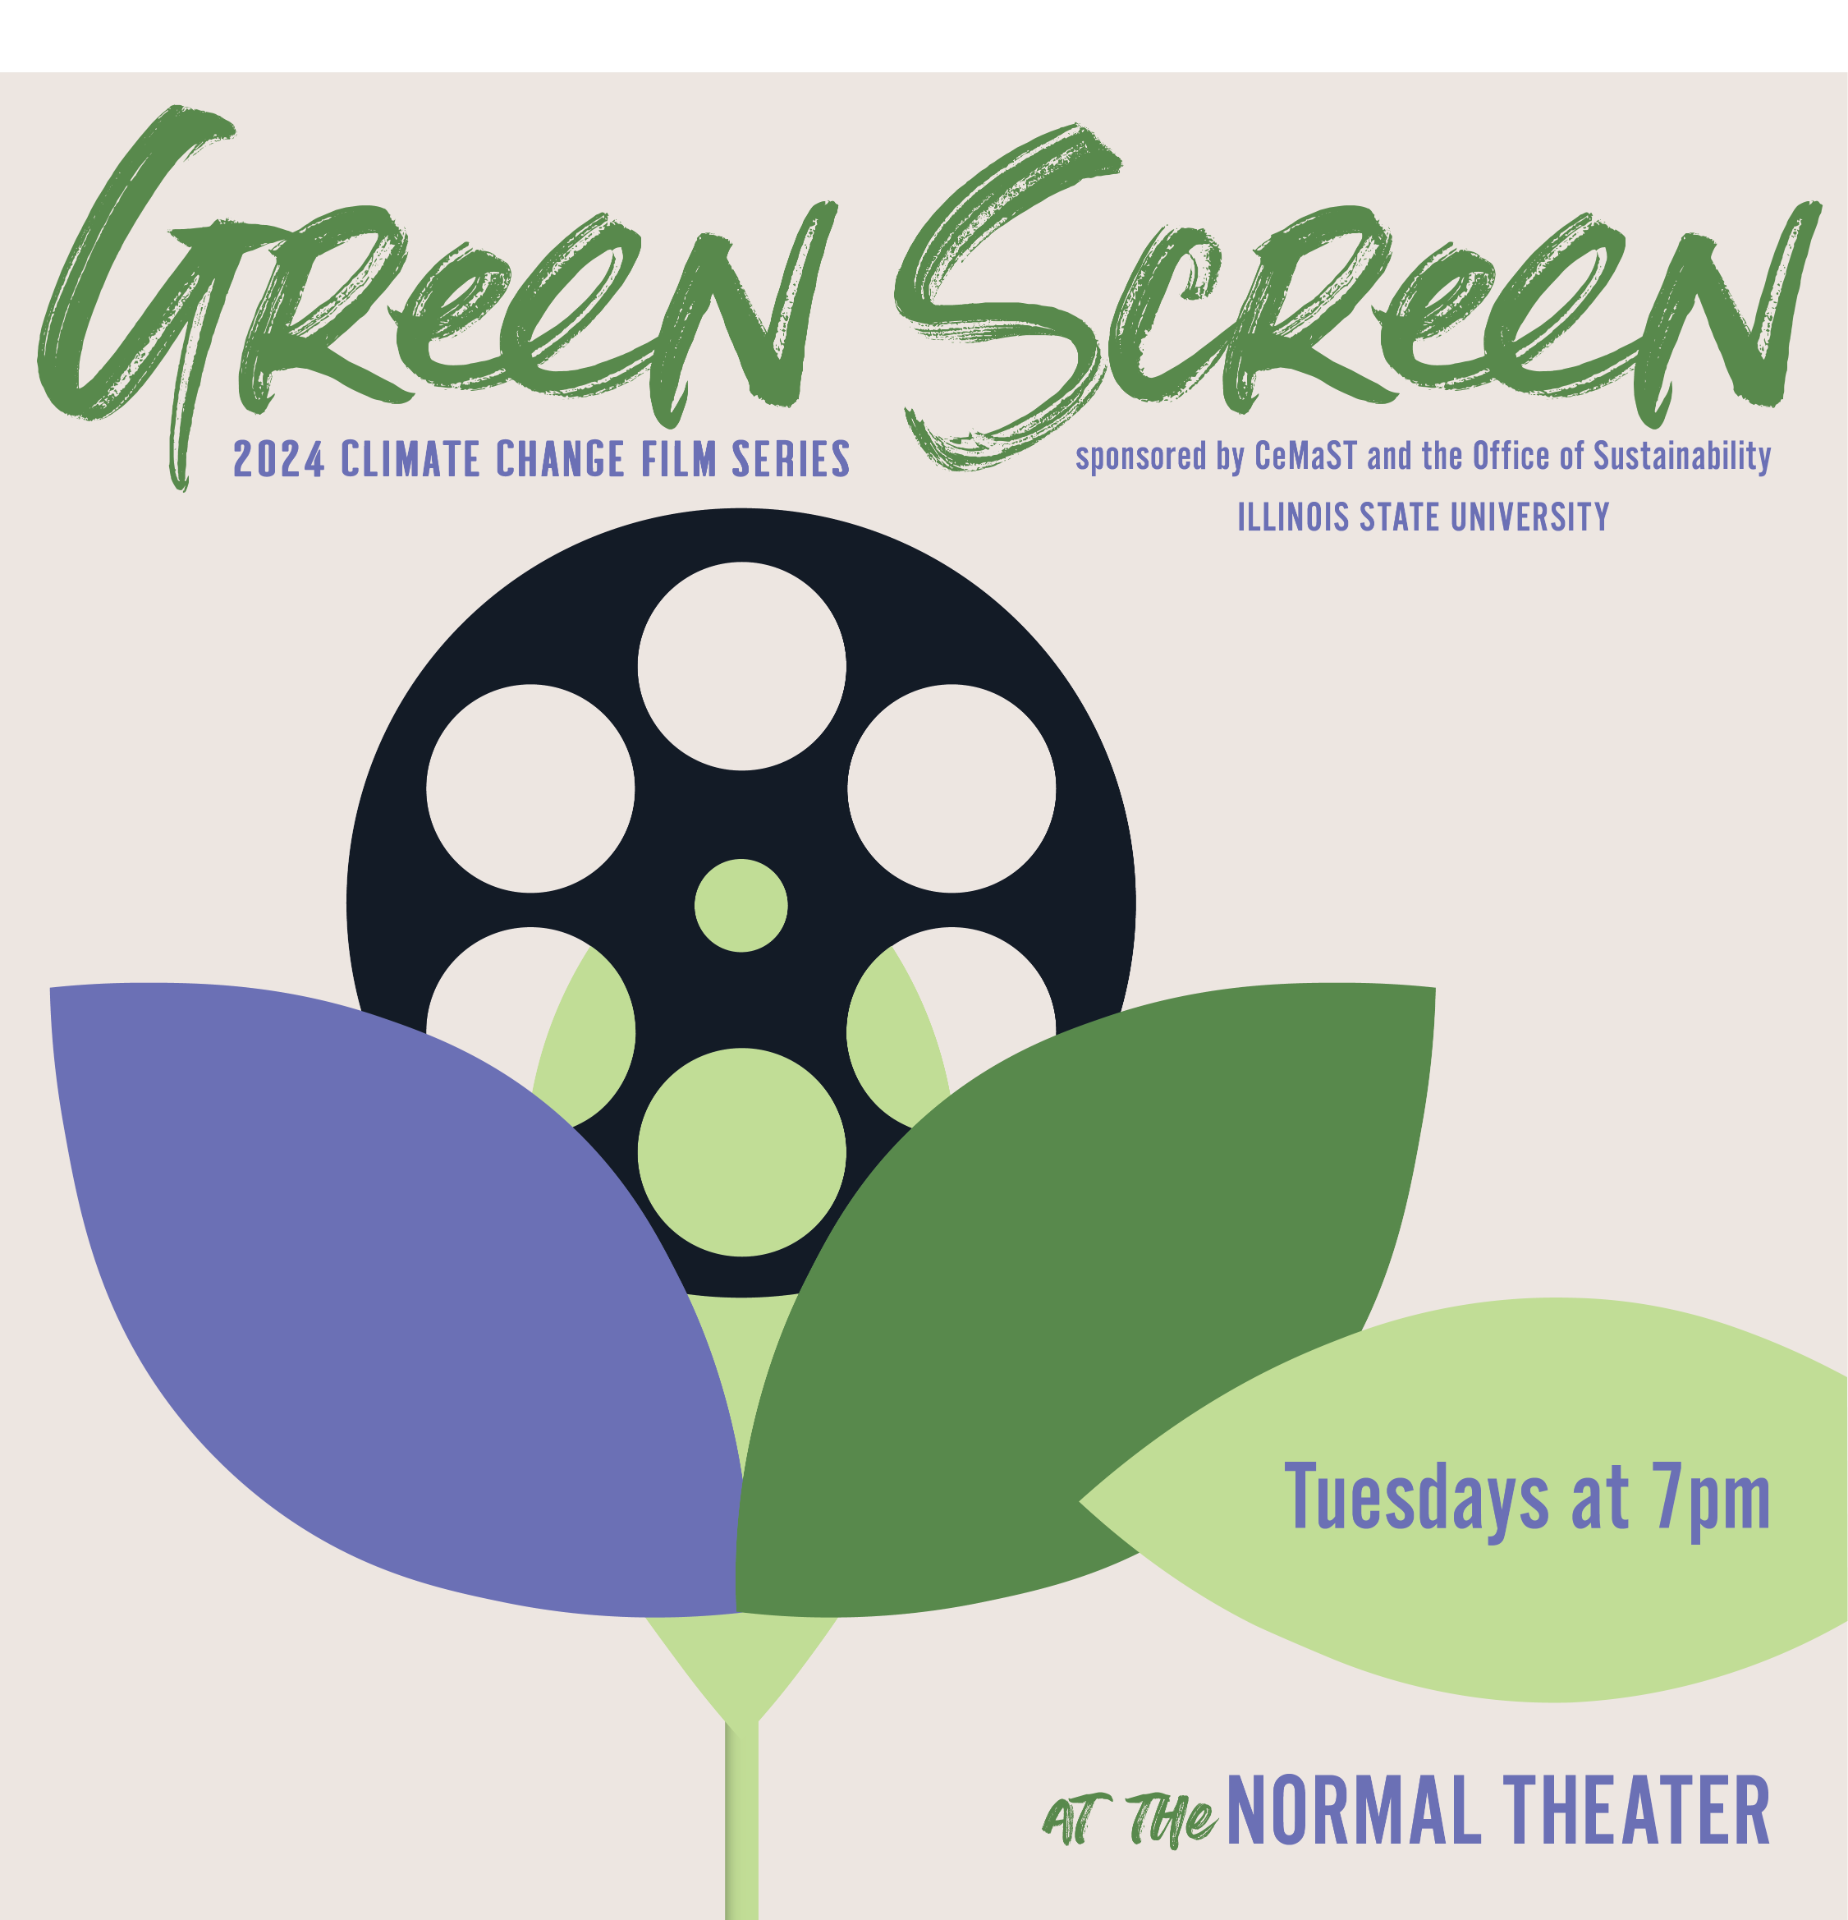 Green Screen 2024 Climate Change Film Series Sponsored by CeMaST and the Office of Sustainability at Illinois State University Tuesdays at 7 p.m. at the Normal Theater